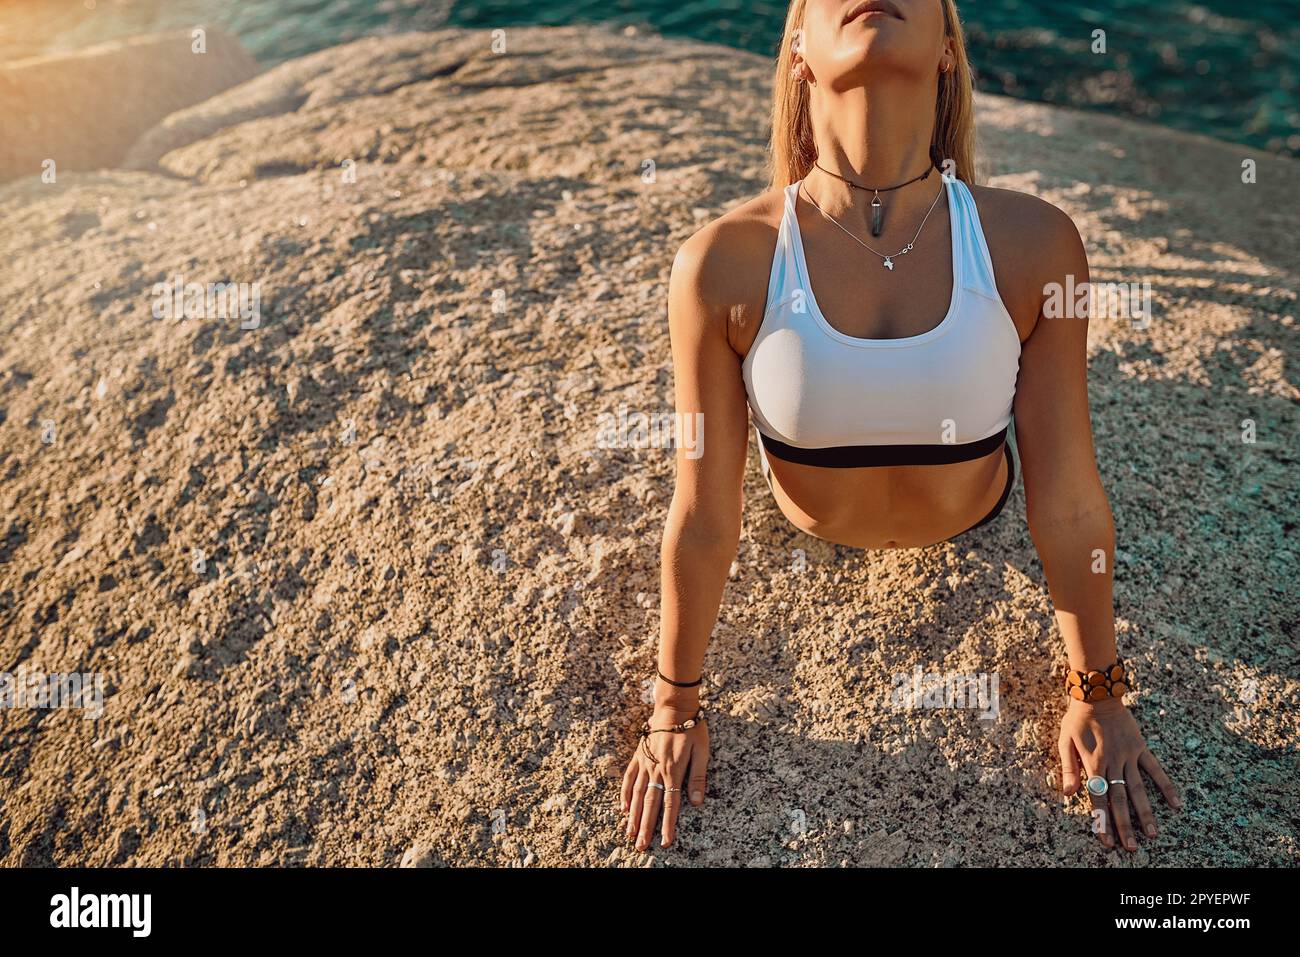 Drop and give me zen. an athletic young woman practicing yoga on the beach. Stock Photo